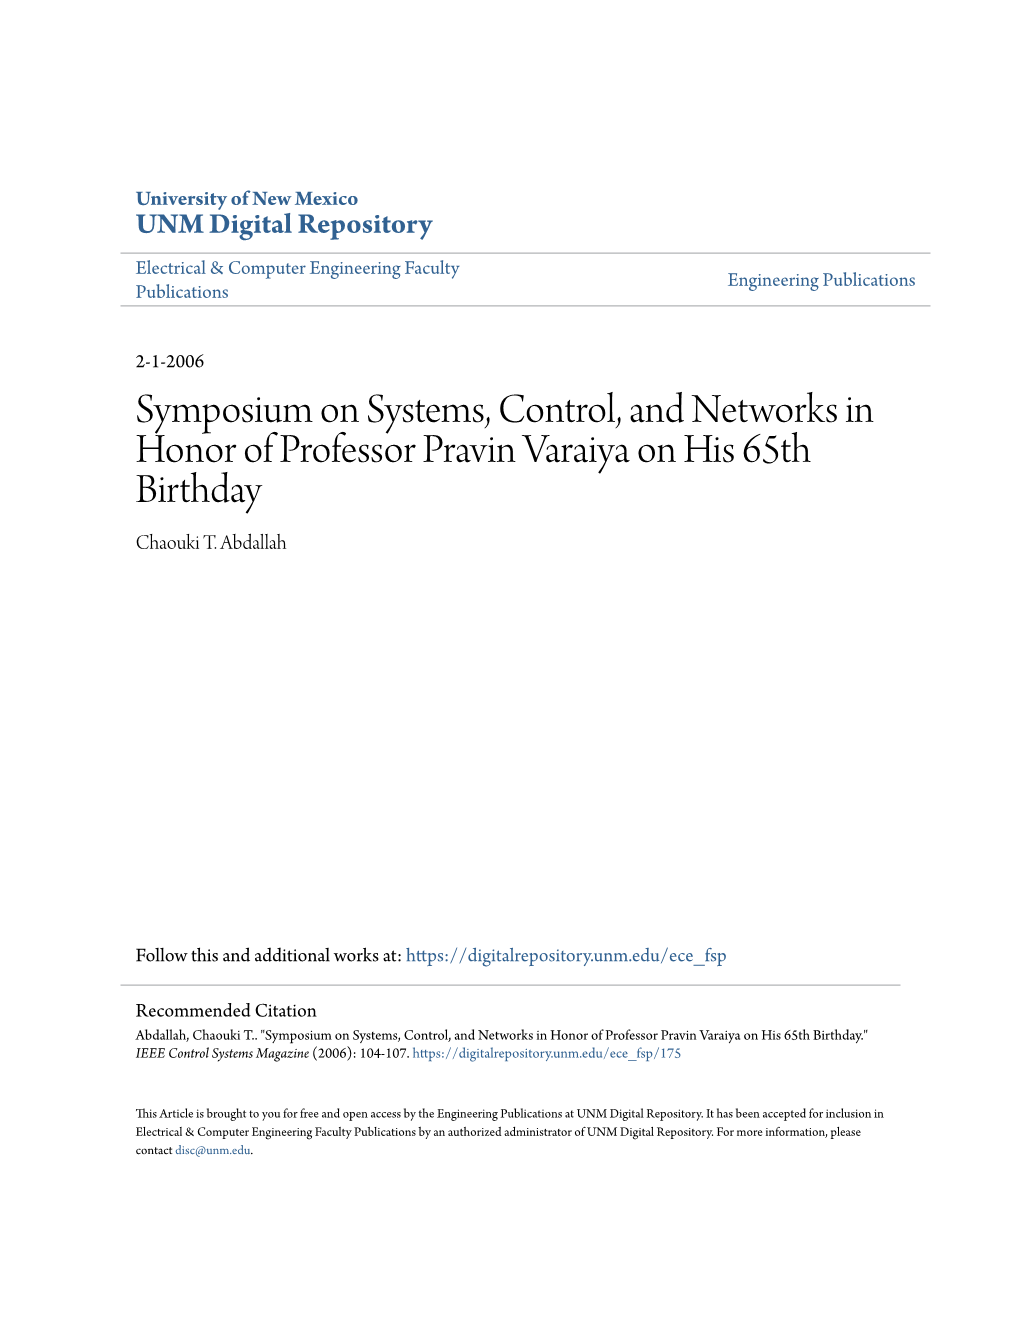 Symposium on Systems, Control, and Networks in Honor of Professor Pravin Varaiya on His 65Th Birthday Chaouki T